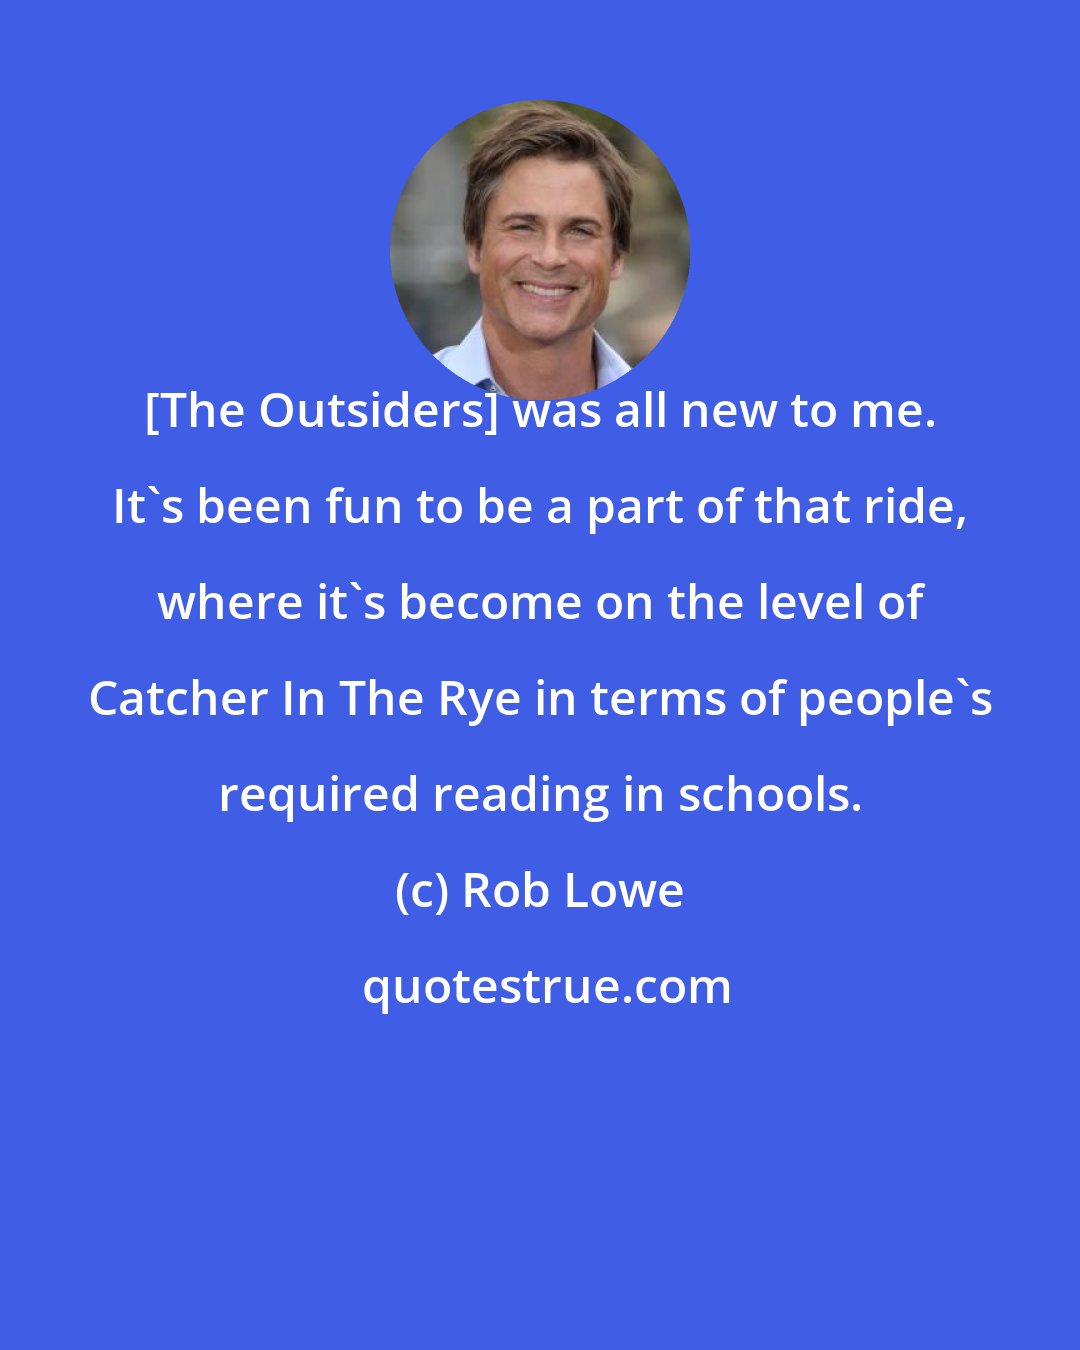 Rob Lowe: [The Outsiders] was all new to me. It's been fun to be a part of that ride, where it's become on the level of Catcher In The Rye in terms of people's required reading in schools.